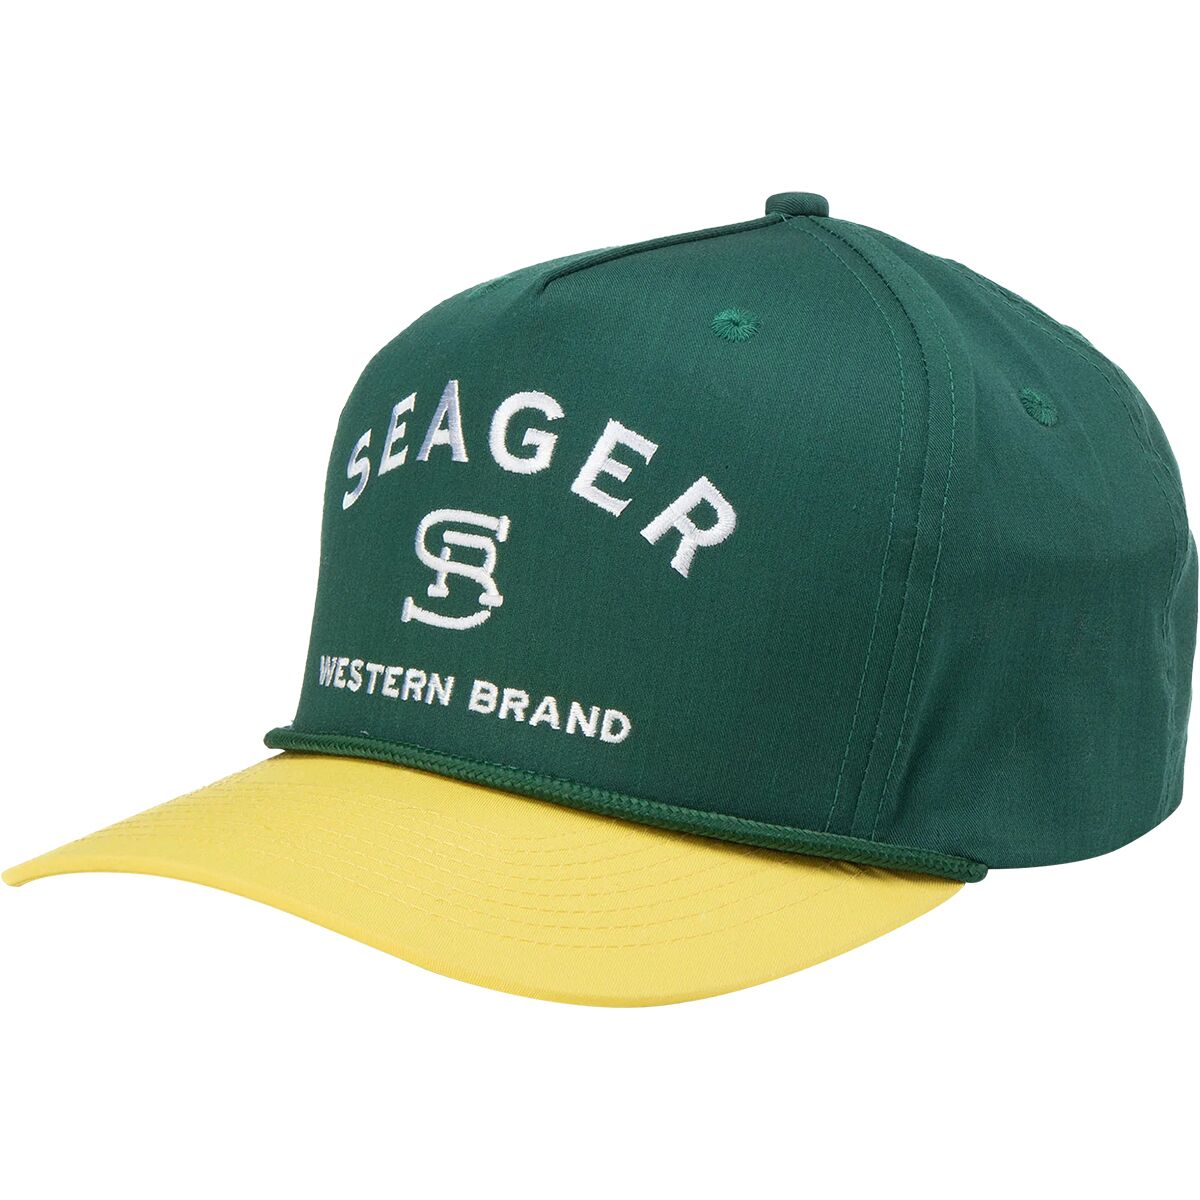 Seager Co. The Branded Snapback Hat